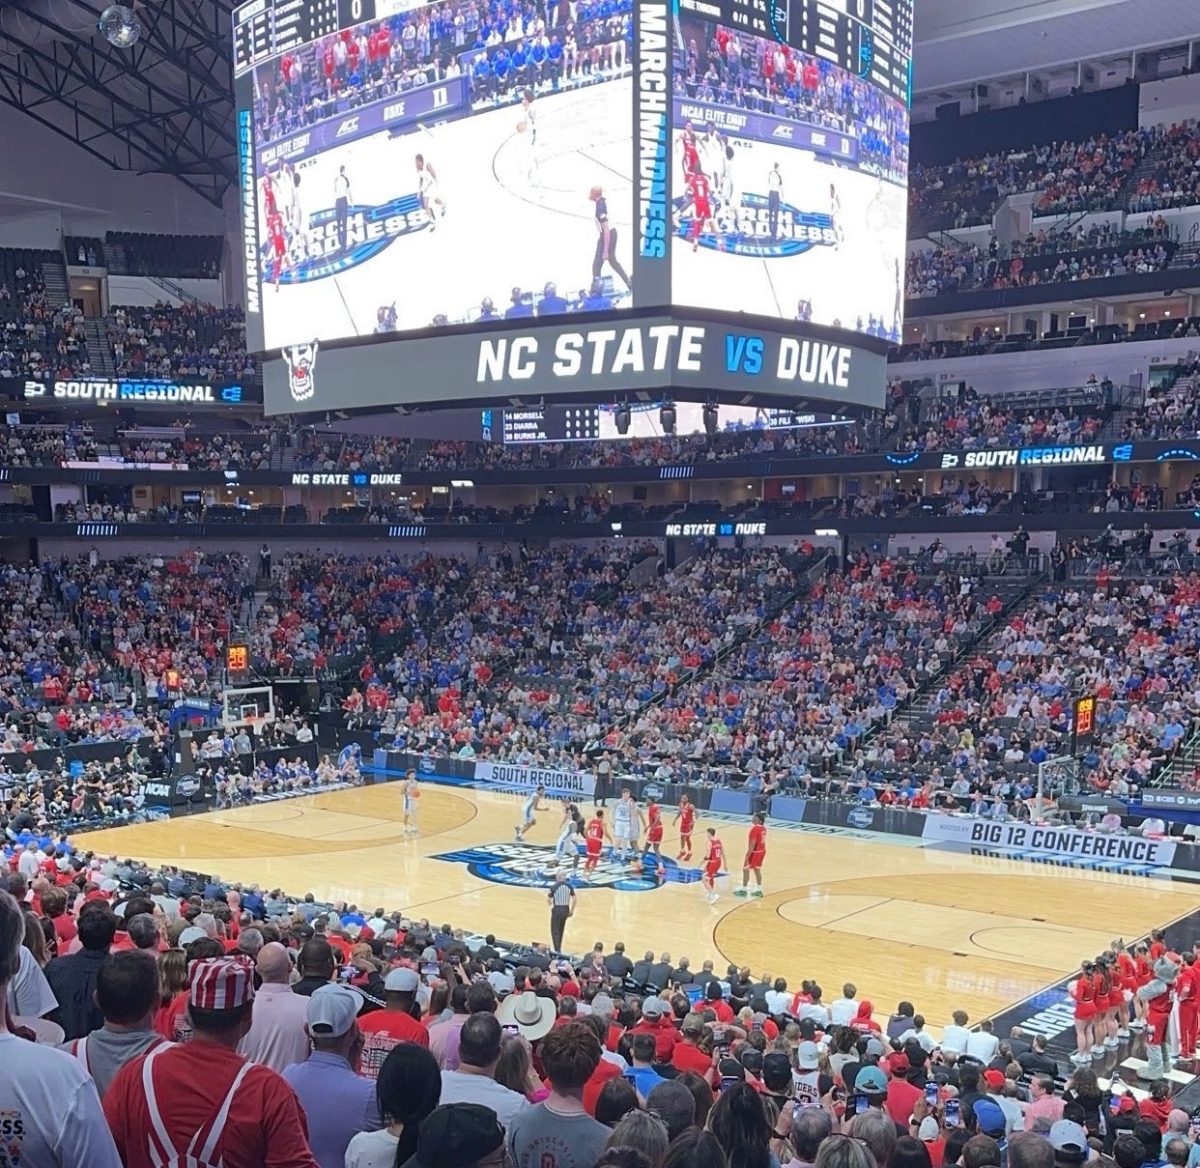 NC State starting their highly-anticipated game against Duke to win the Elite Eight. Photo used with permission from Jackson Cowen.